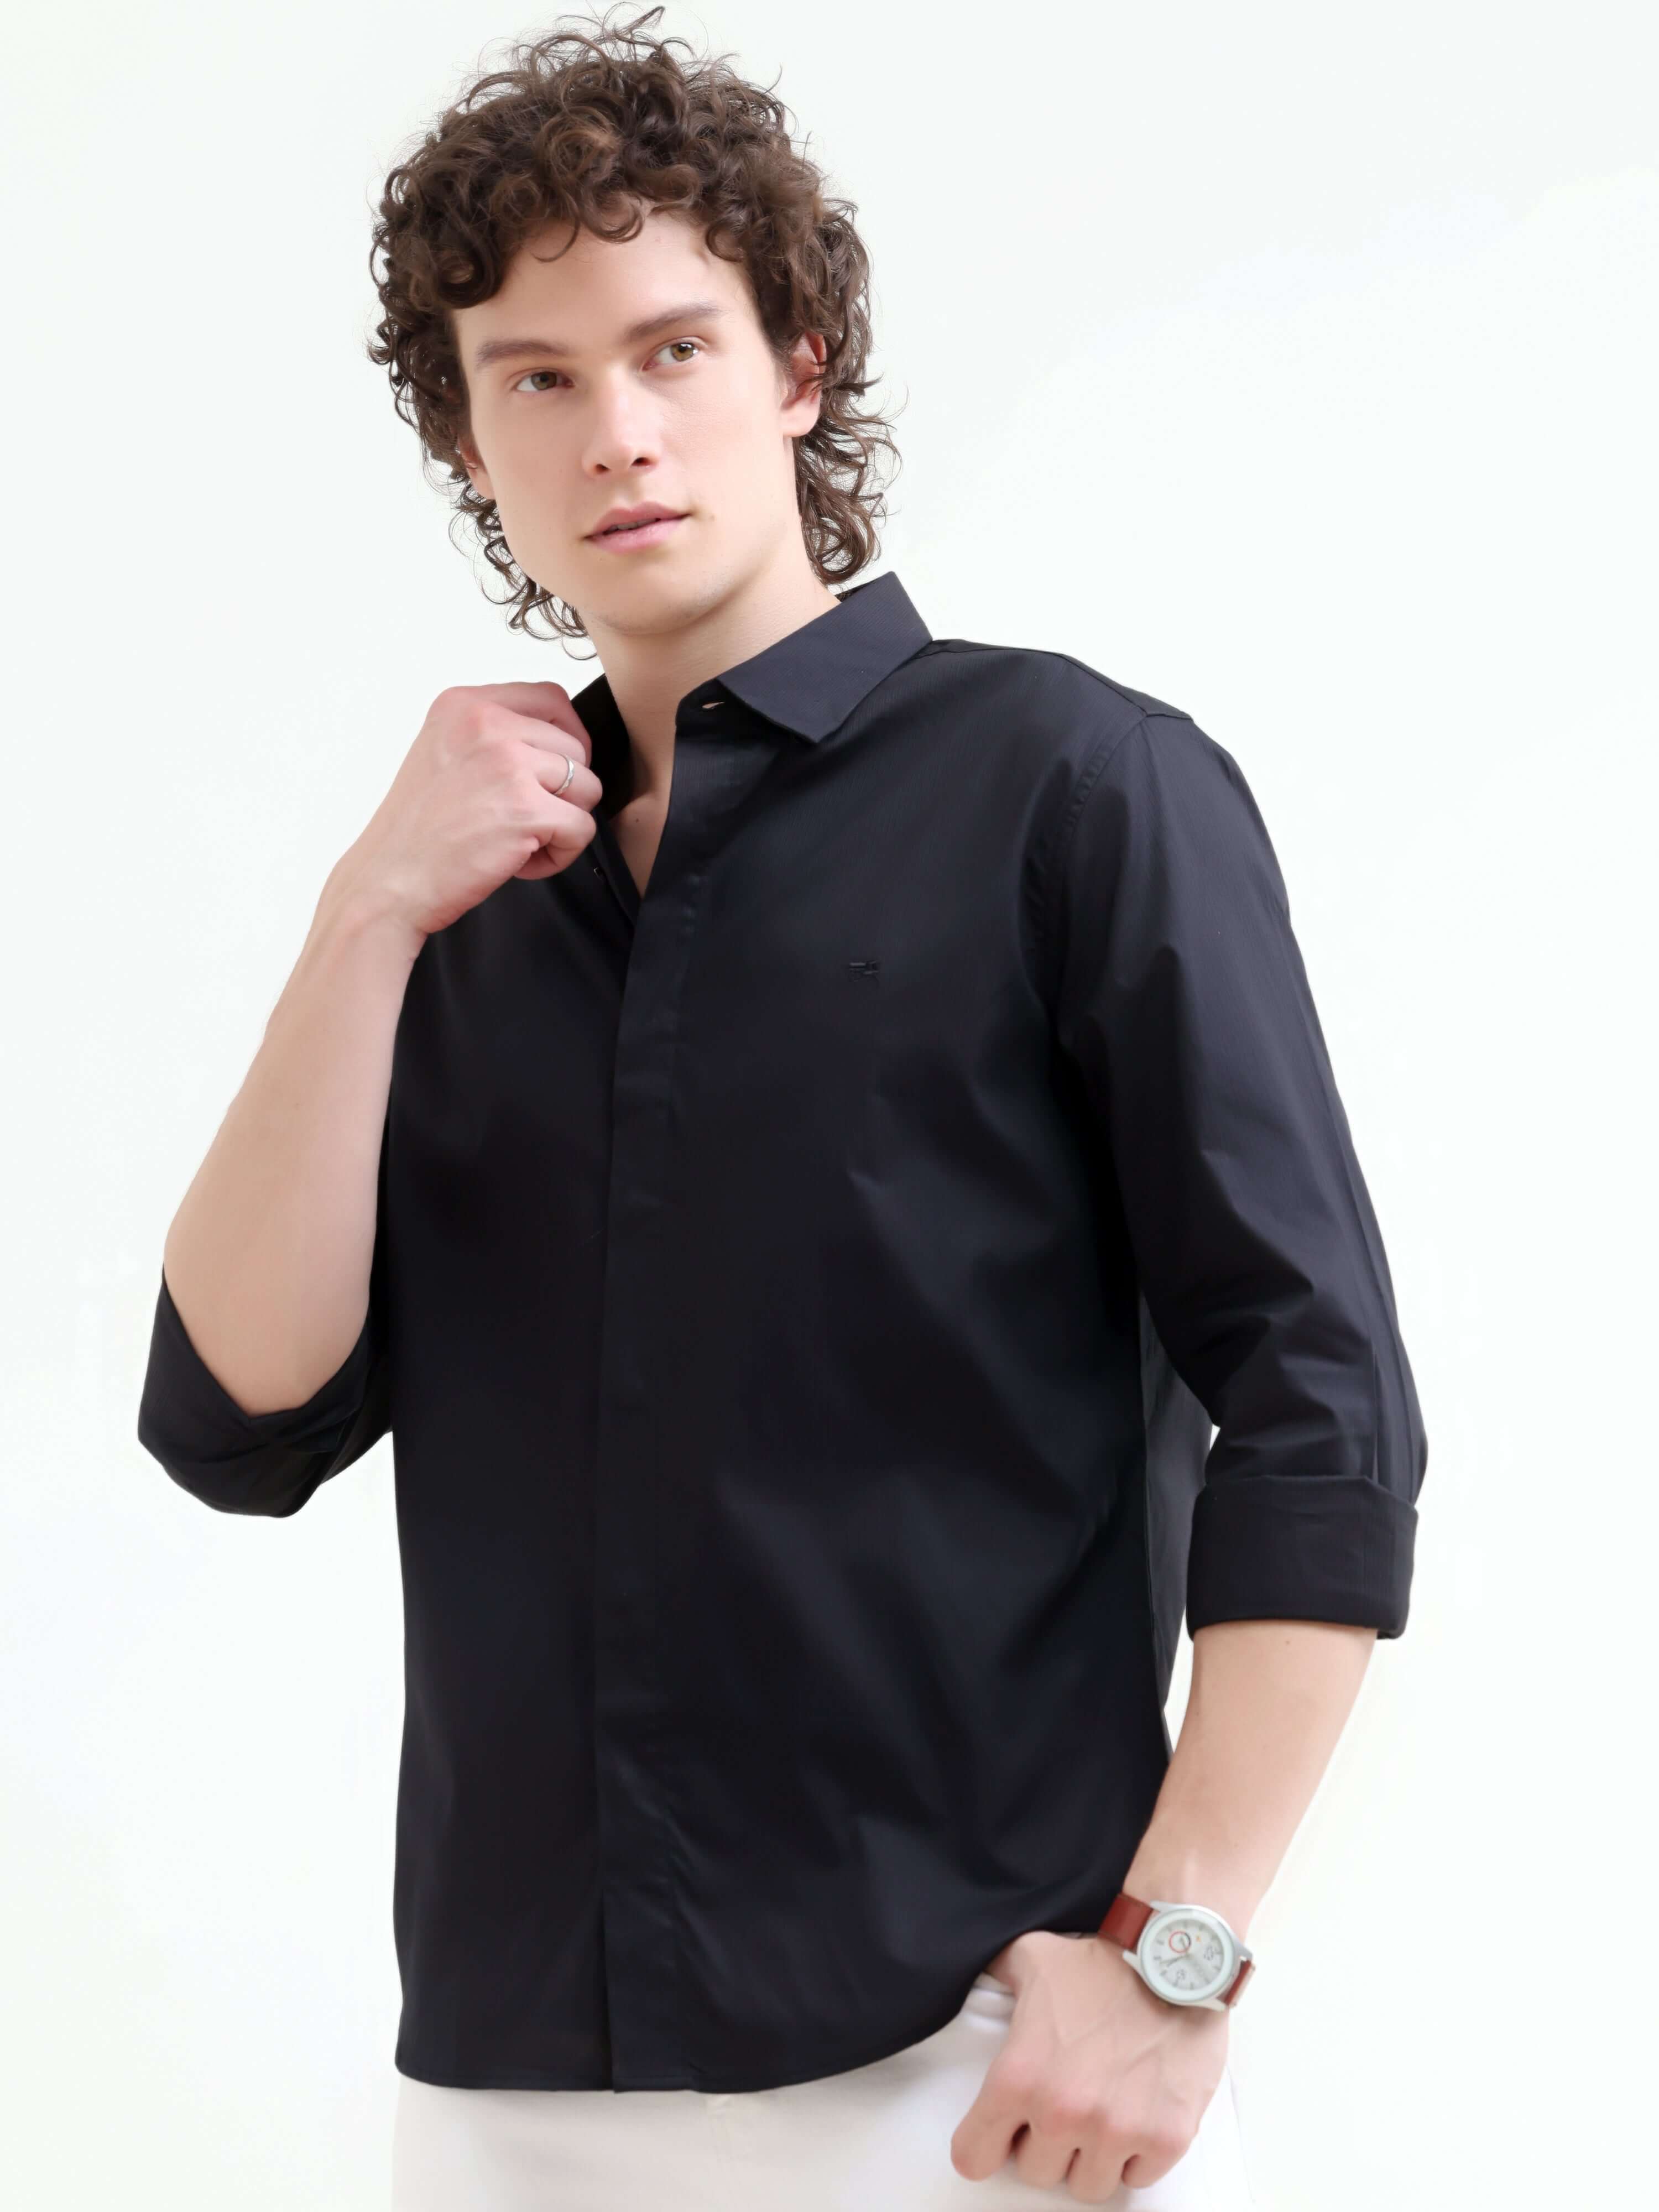 Guild Business Black Shirt - New Men's Summer Essential shop online at Estilocus. Elevate your style with the new Guild black shirt. Perfect blend of elegance & comfort for your summer wardrobe. Shop now!